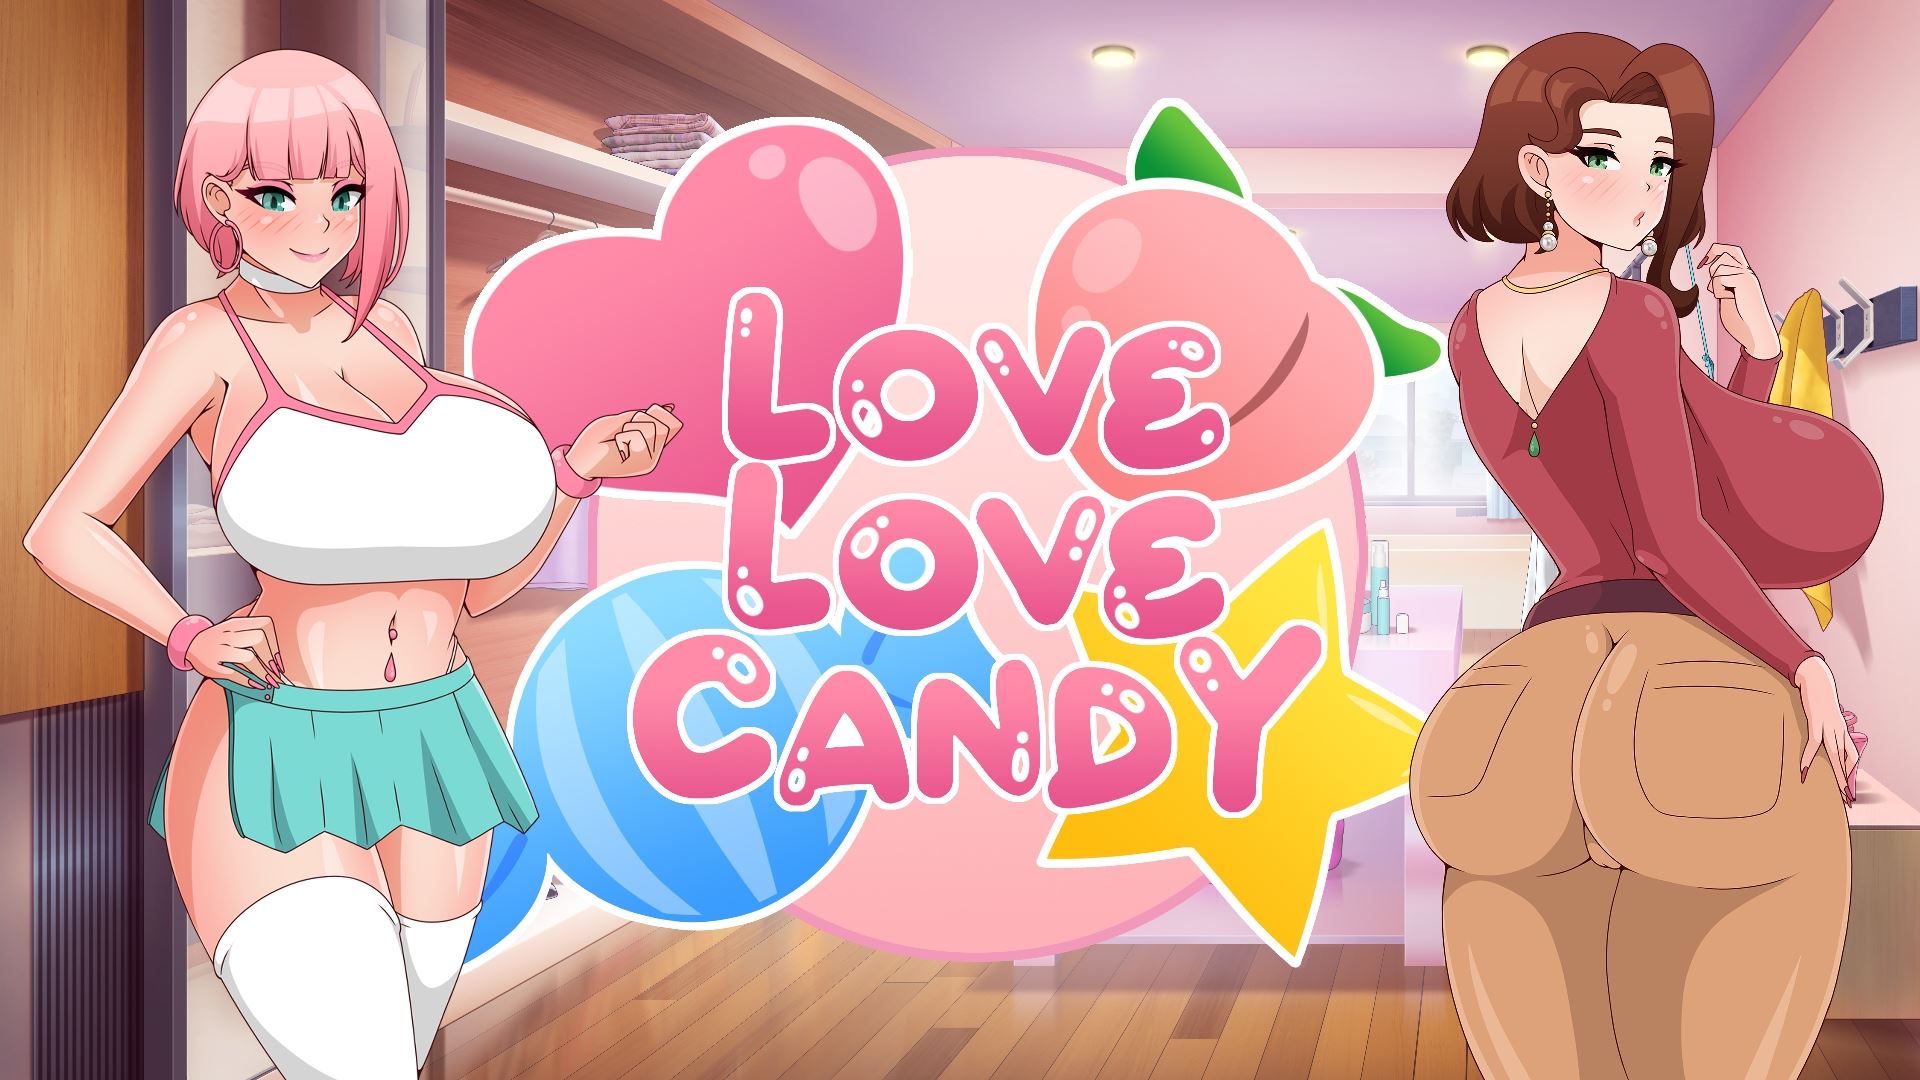 Love Love Candy [Finished] - Version: Final